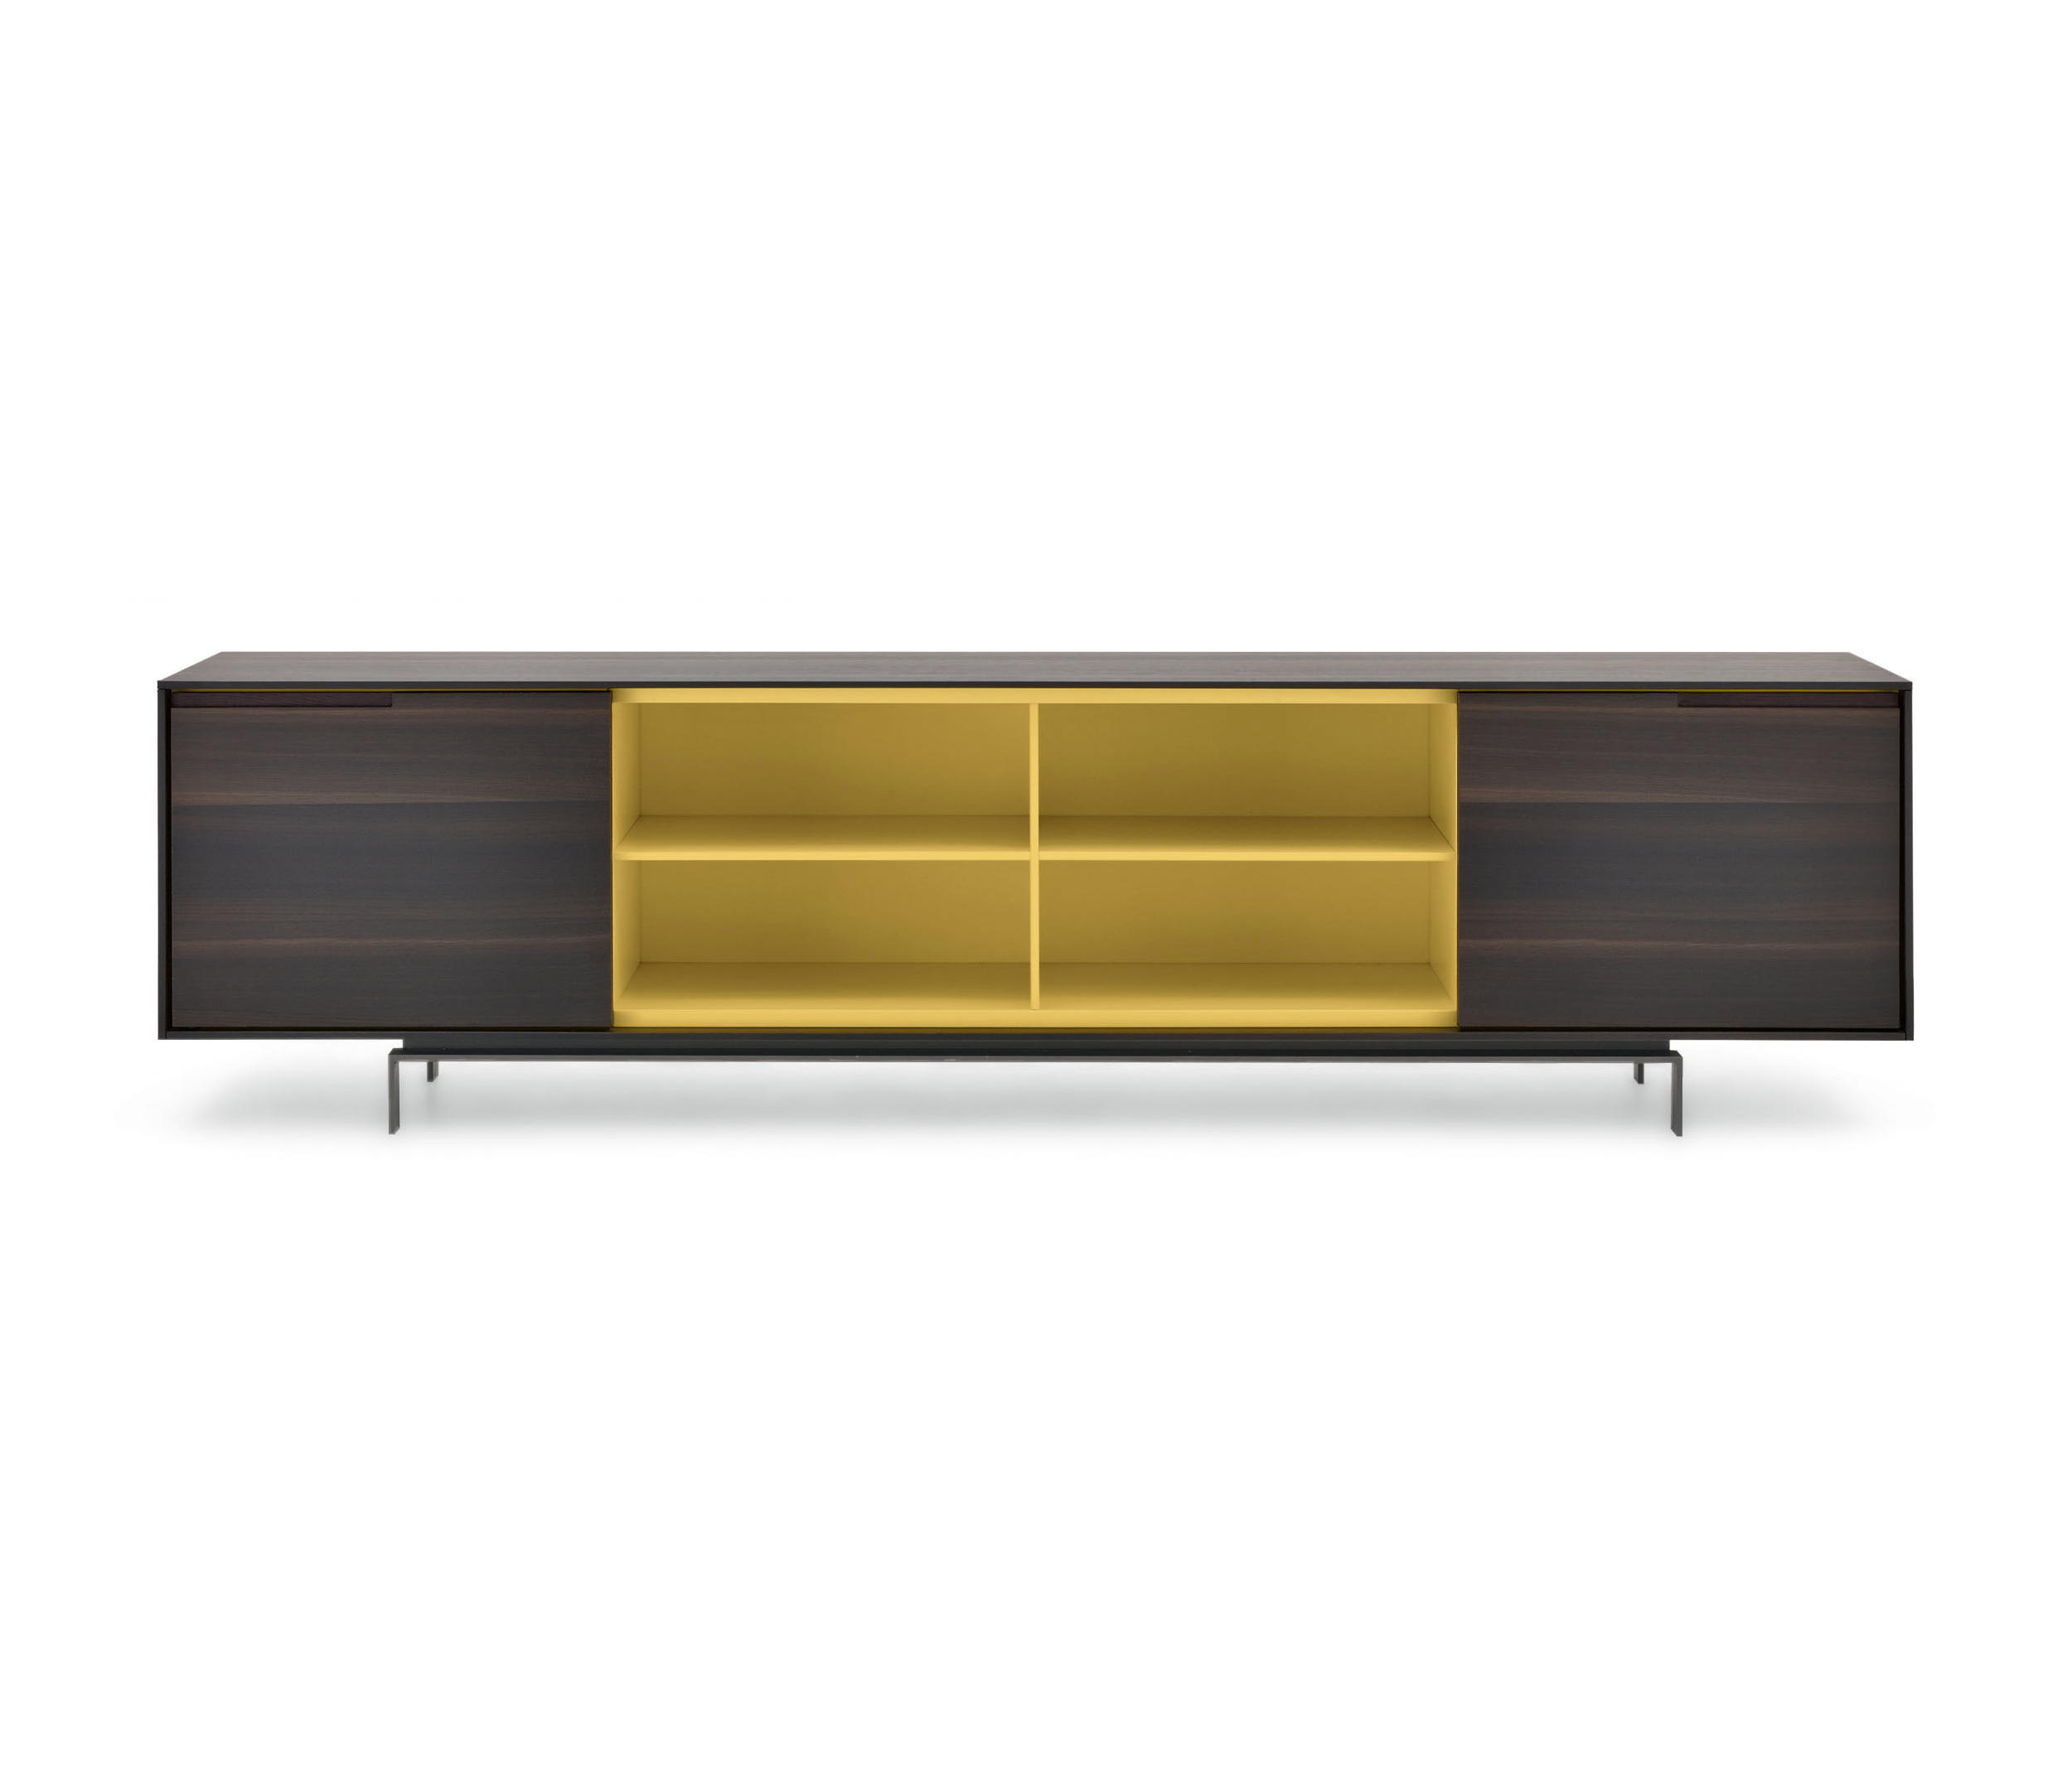 AXIA SIDEBOARD - Sideboards from Poliform | Architonic